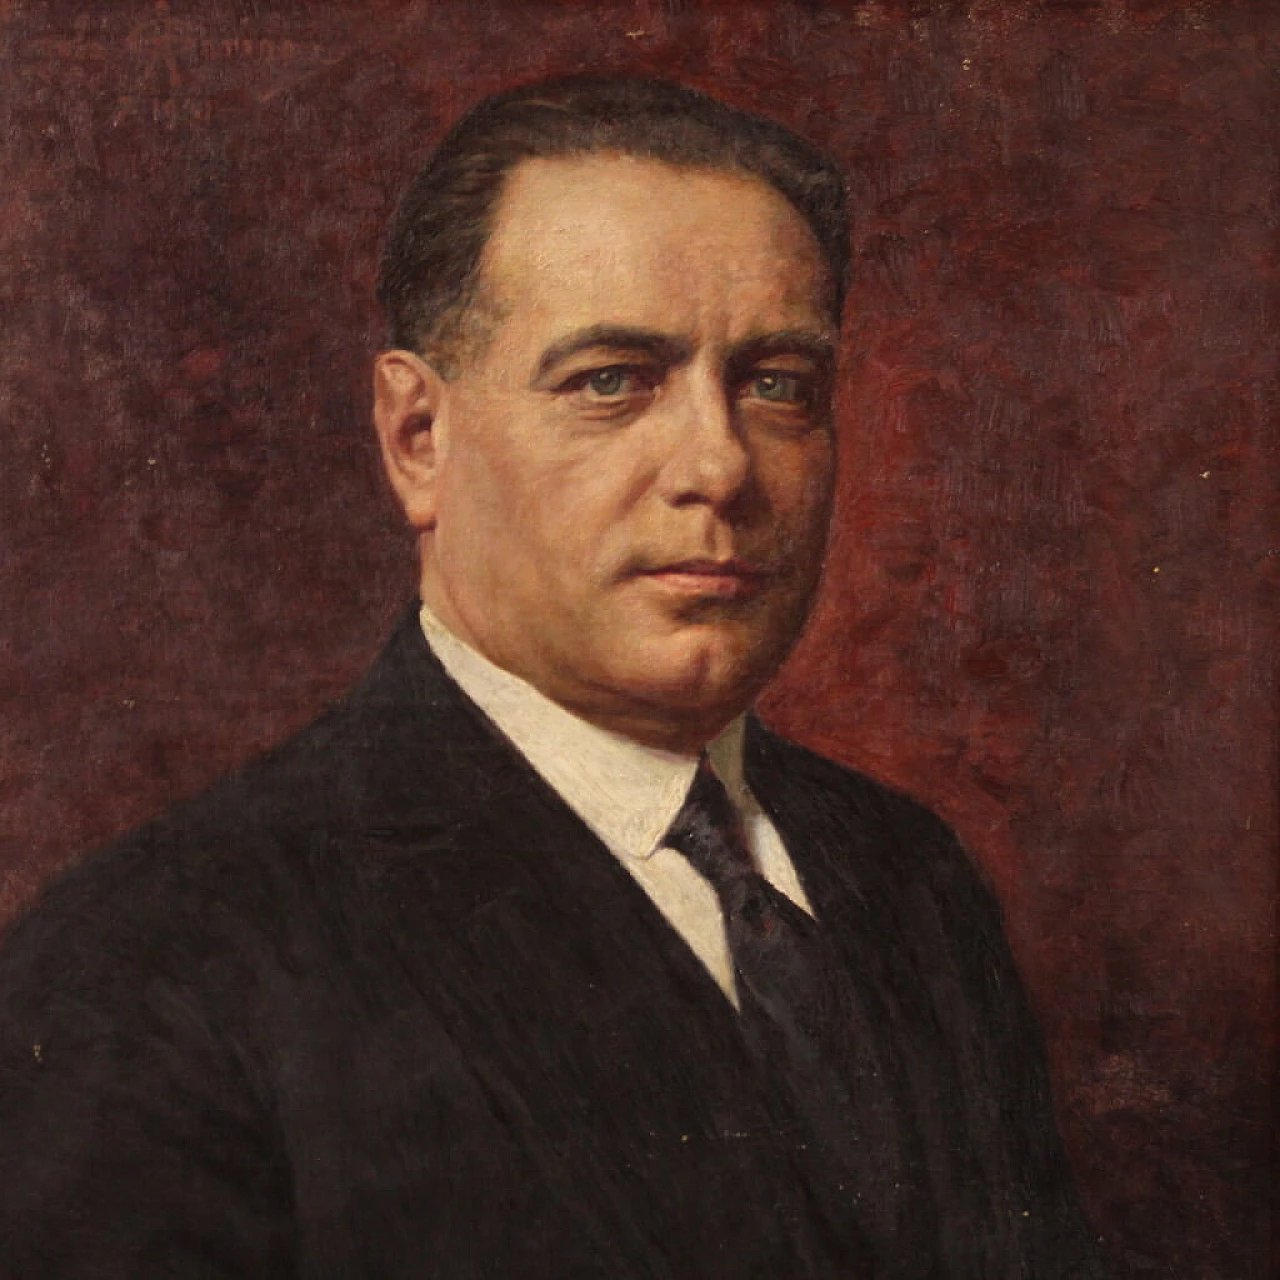 Angelo Garino, male portrait, oil painting on canvas, 1931 3